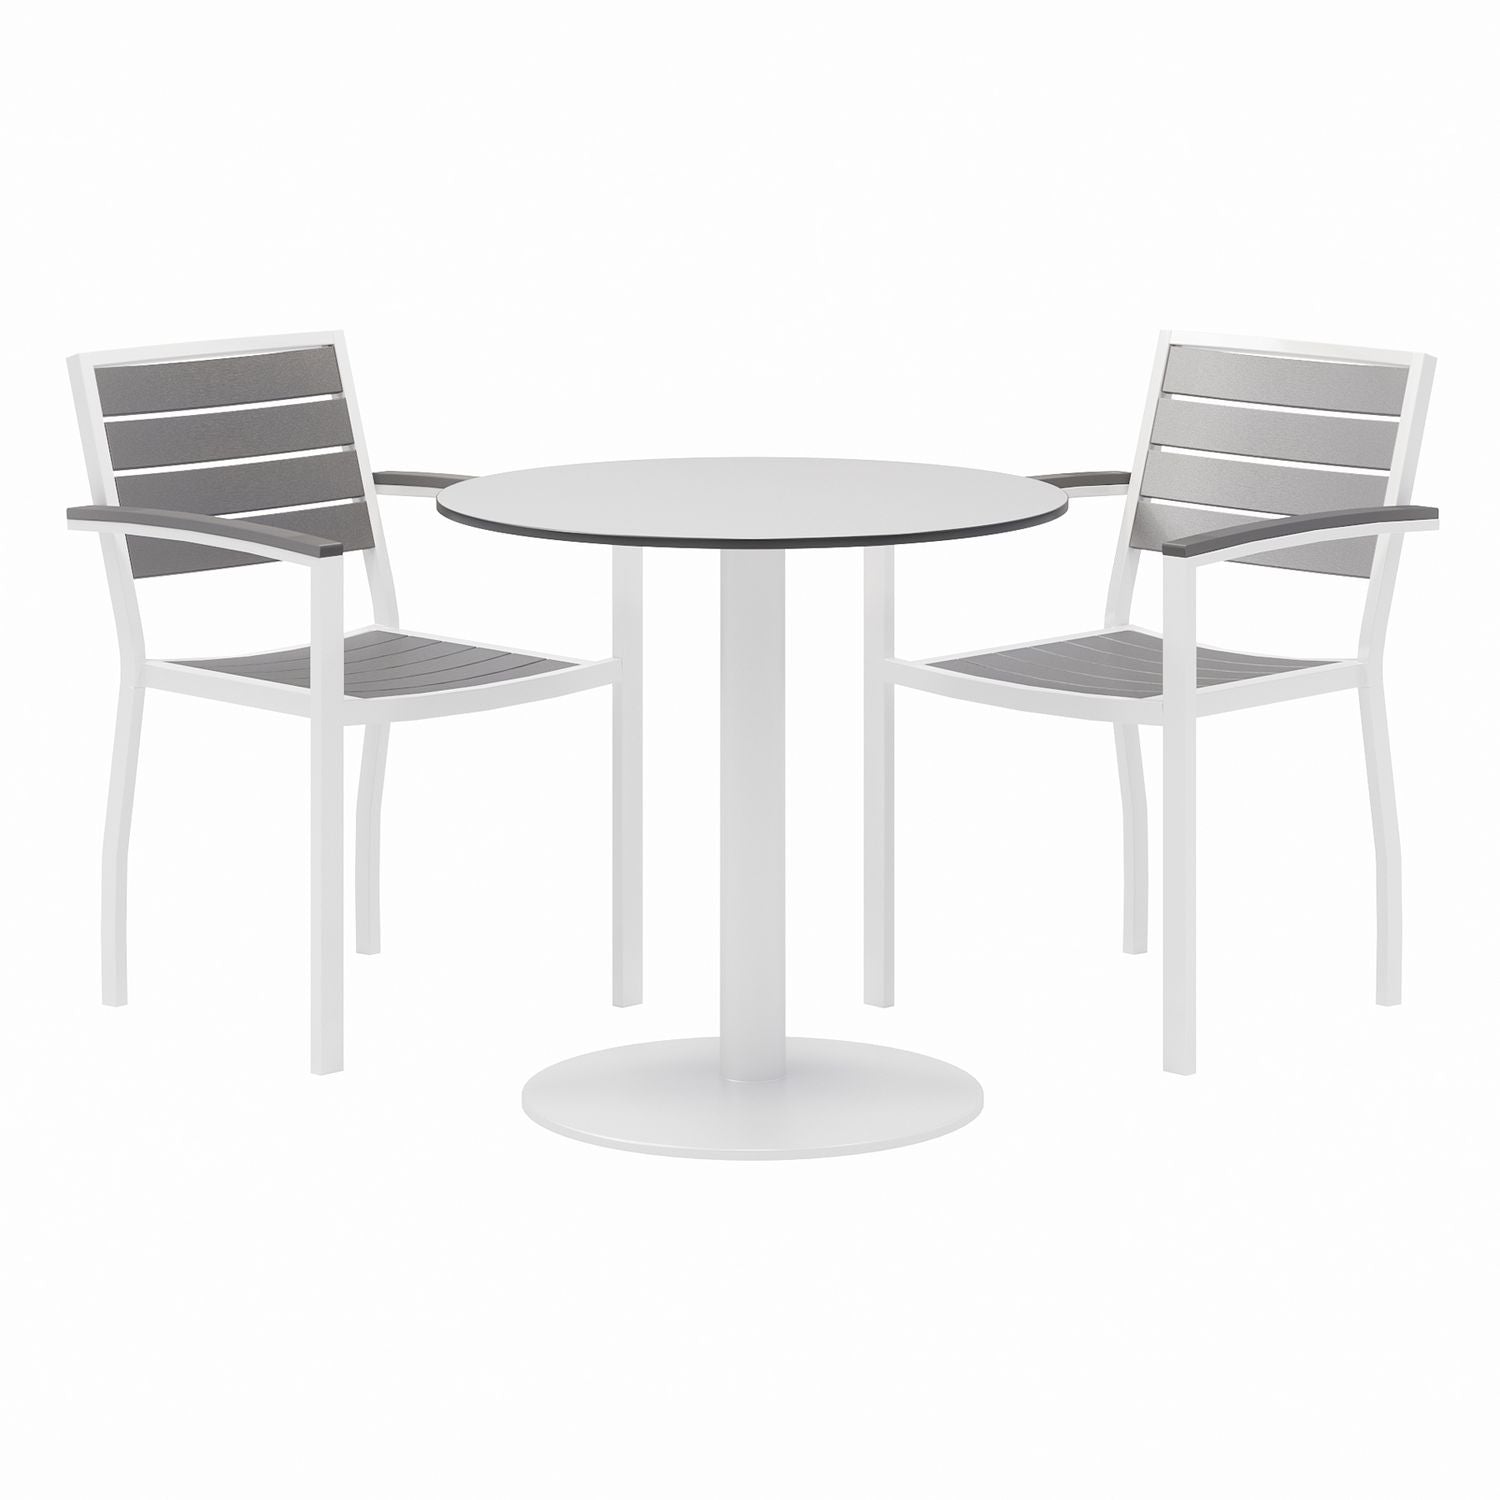 eveleen-outdoor-patio-table-with-2-gray-powder-coated-polymer-chairs-30-dia-x-29h-designer-white-ships-in-4-6-bus-days_kfi840031918451 - 1